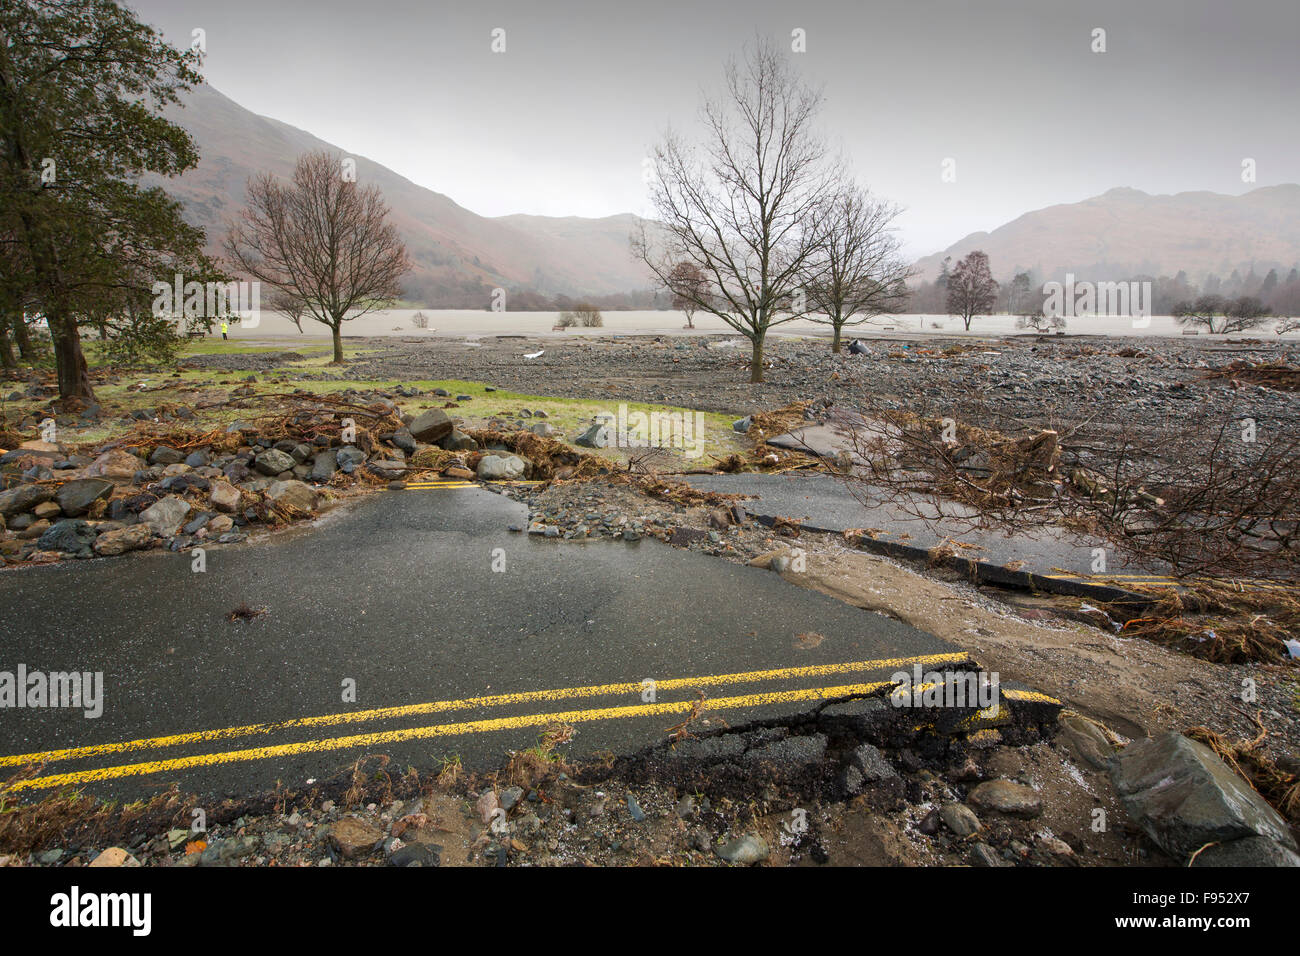 On Saturday 5th December 2015, Storm Desmond crashed into the UK, producing the UK's highest ever 24 hour rainfall total at 341.4mm. It flooded the Lakeland village Glenridding, which was just starting to repair when another period of heavy rain on Wednesday 9th December caused the Glenridding Beck to burst its banks, causing yet further destruction. This shot taken on Friday 11th December shows a road in Glenridding washed sideways by the force of the floods. Stock Photo